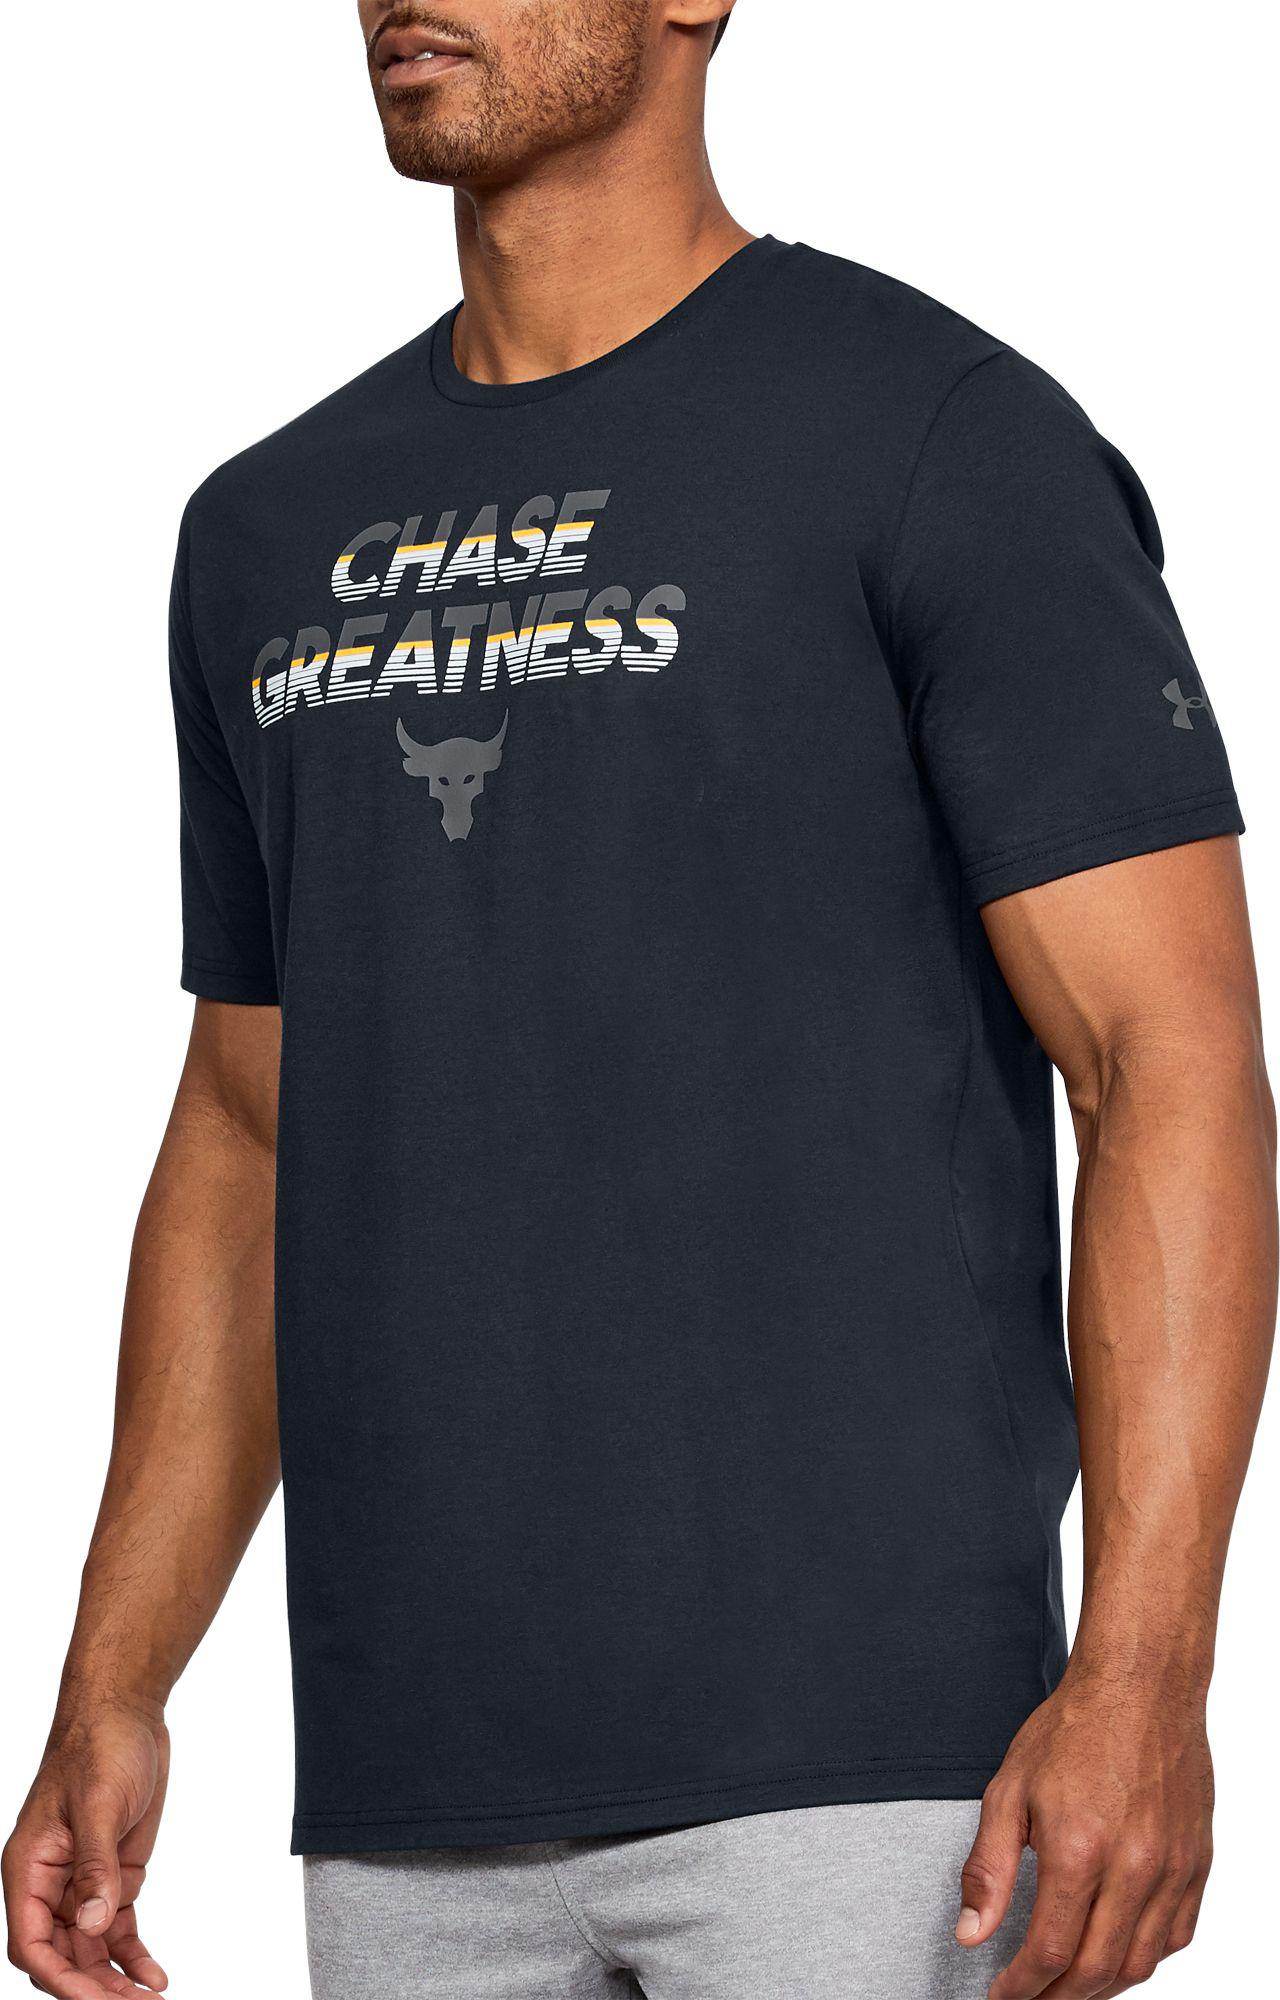 Download Under Armour Cotton Project Rock Chase Greatness Graphic T ...